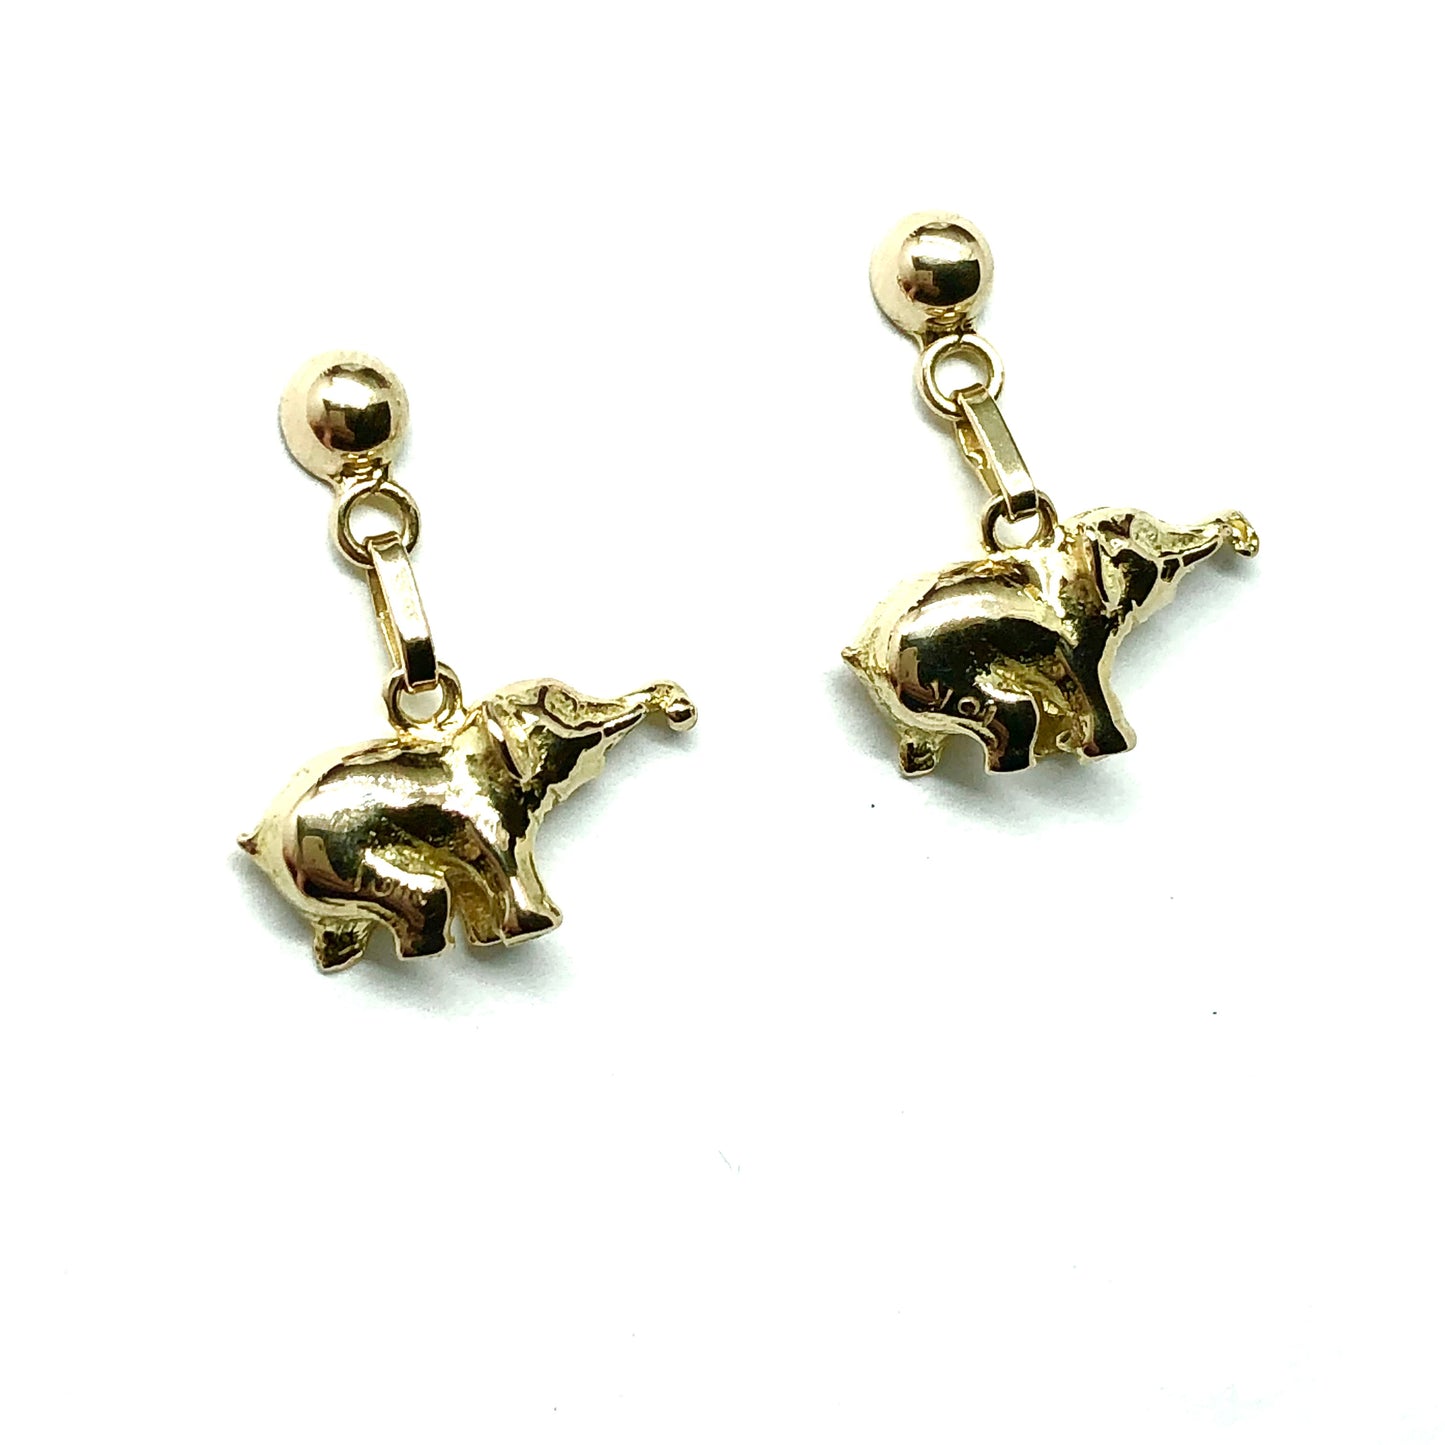 Jewelry used - Solid 18k Gold Elephant Charm Style Dangle Earrings - Blingschlingers.com in USA